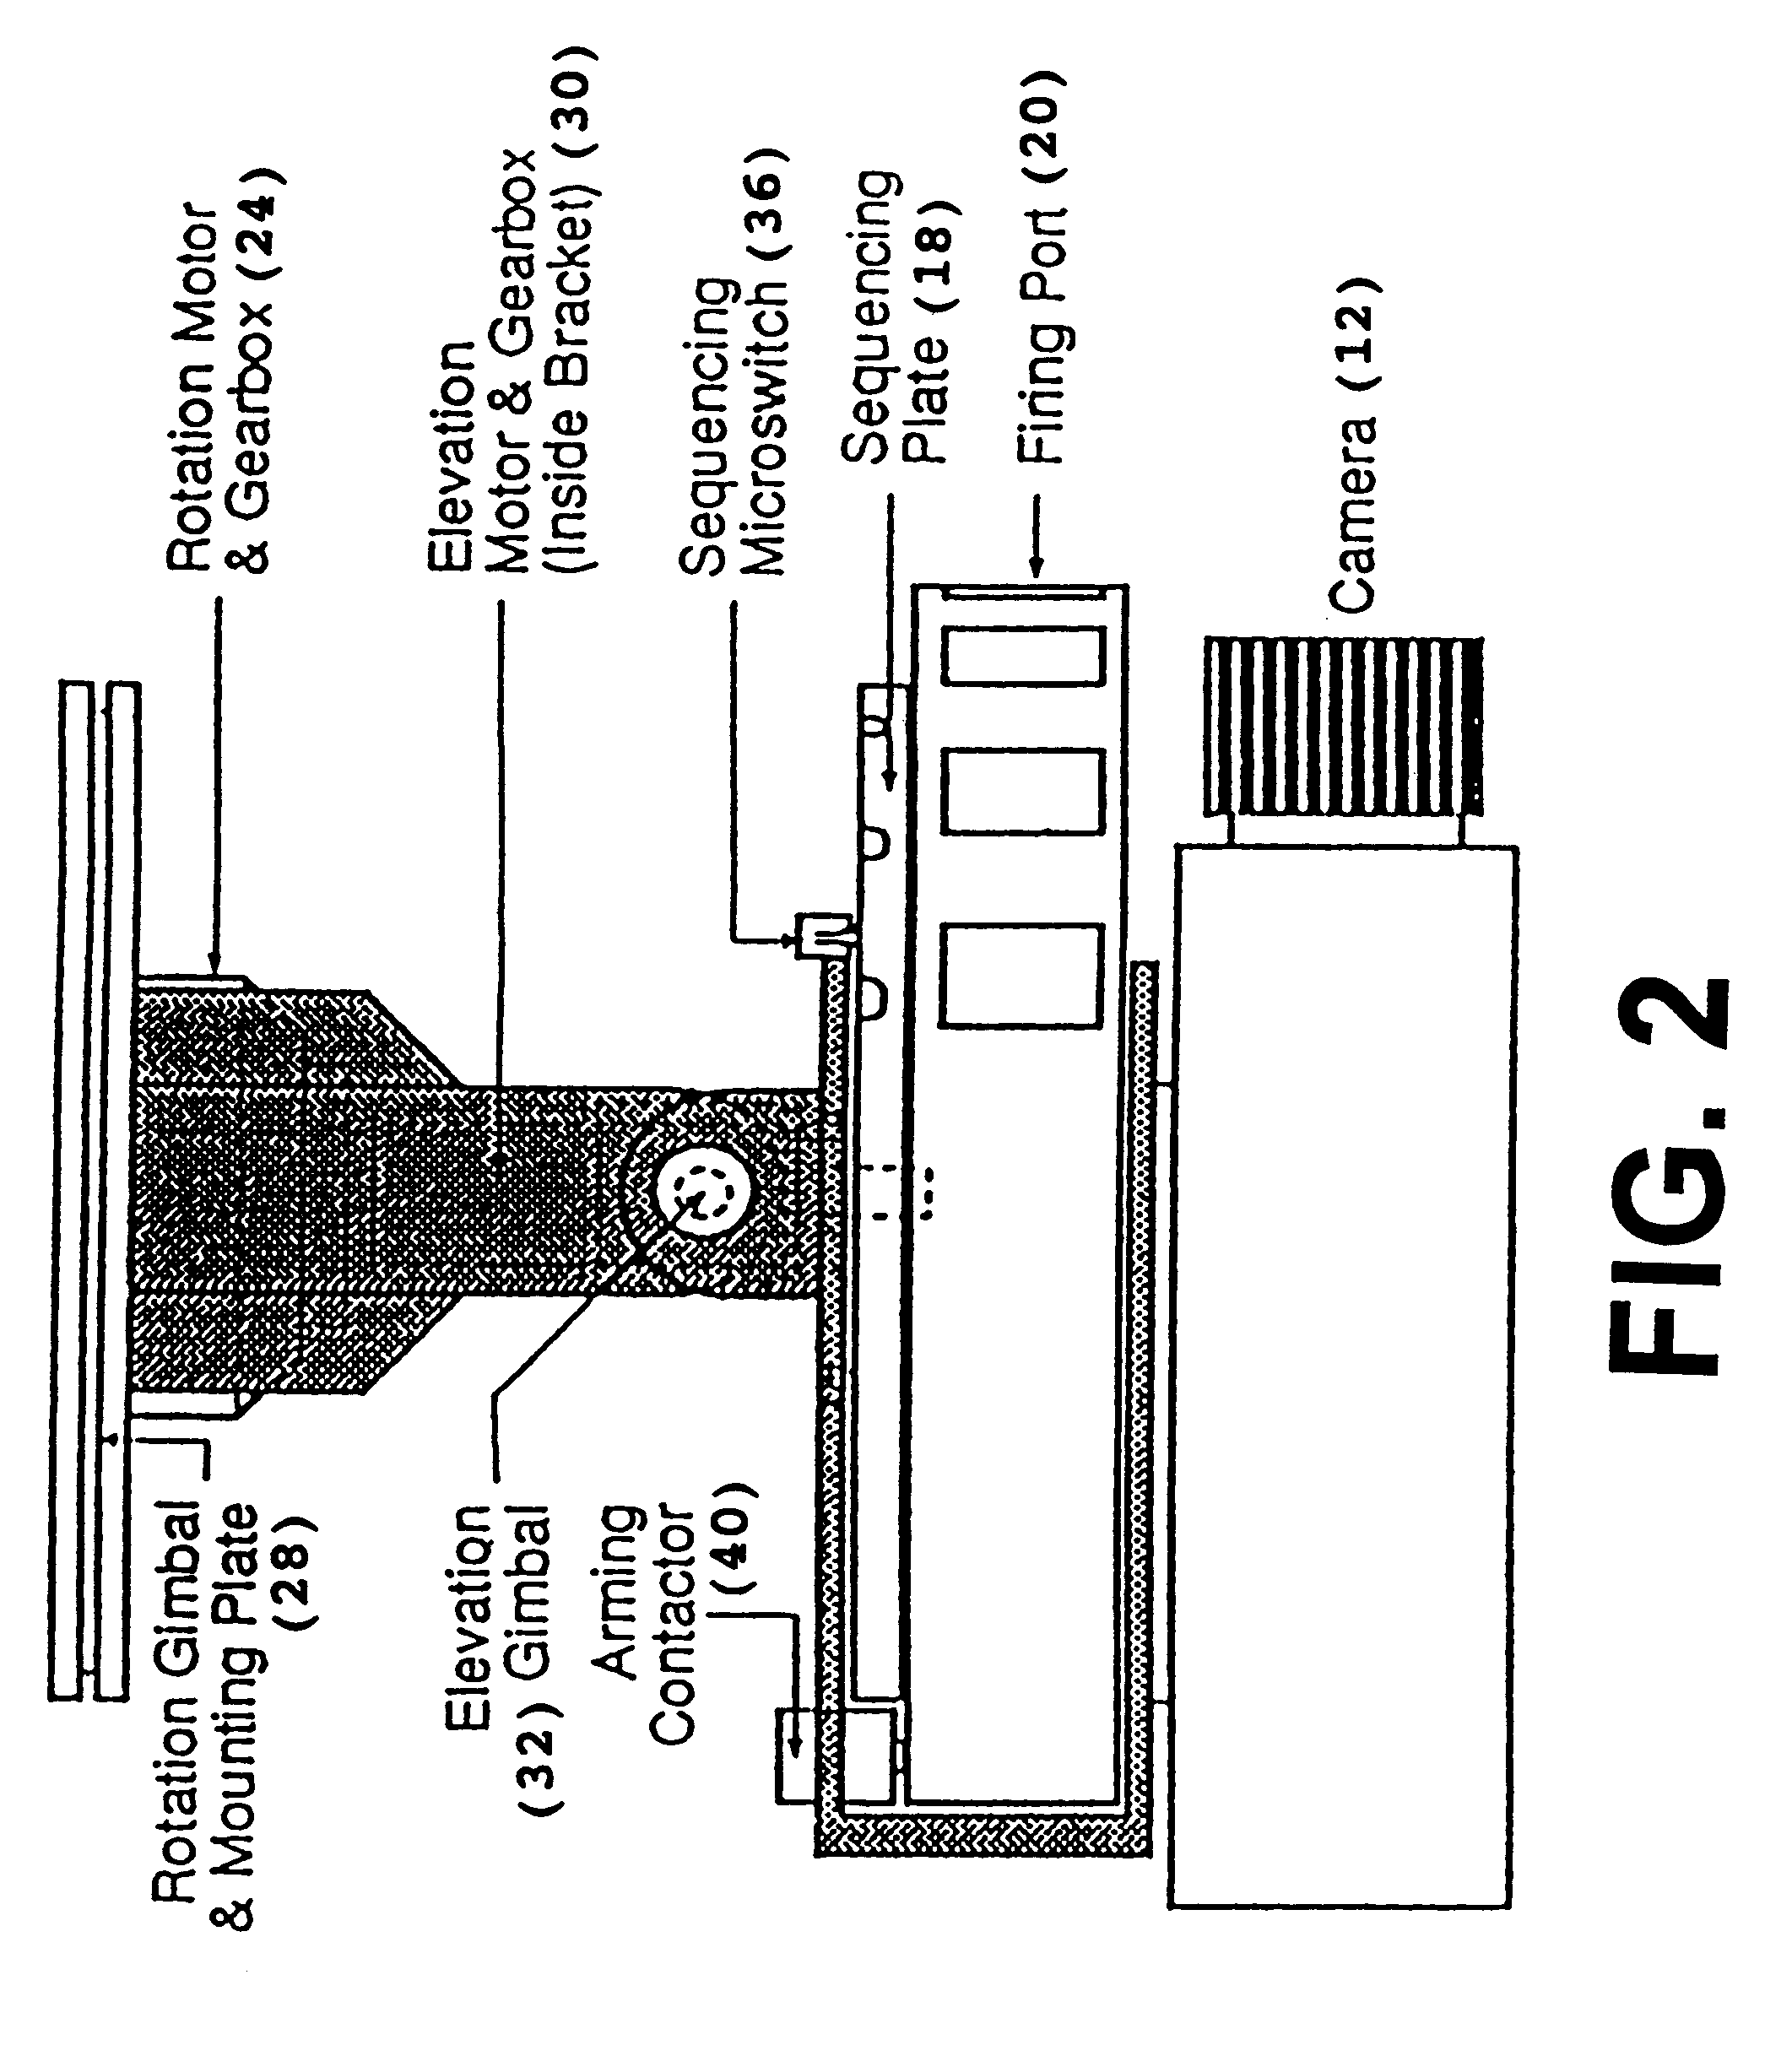 Multi-shot, non-lethal, taser cartridge remote firing system for protection of facilities and vehicles against personnel